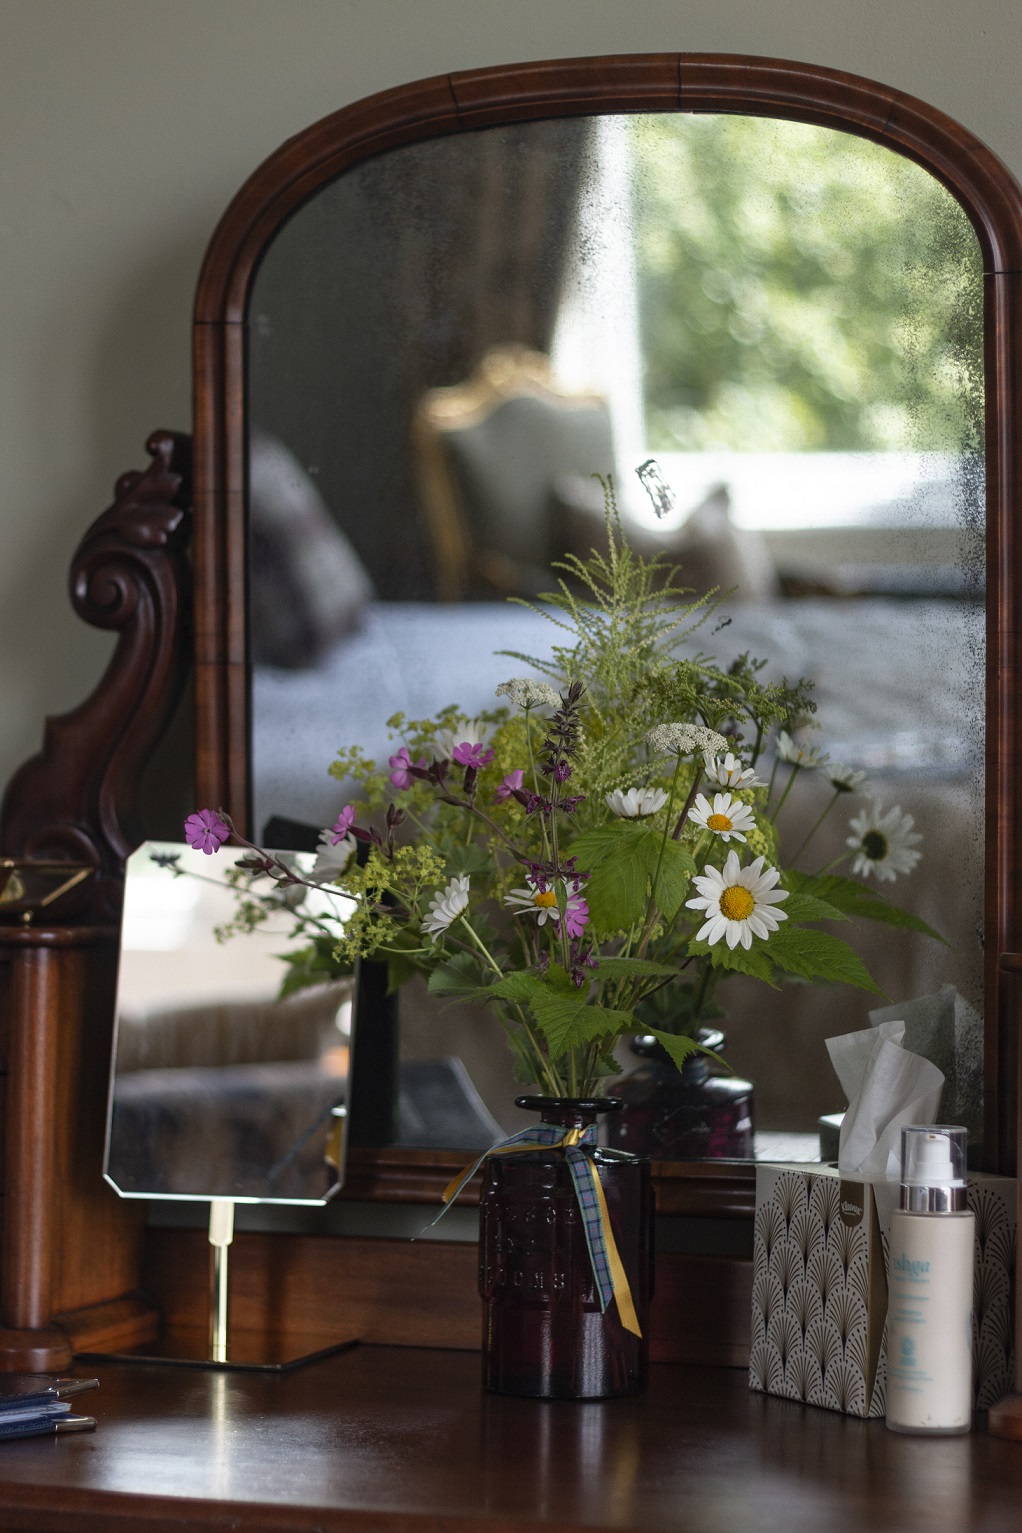 A mirror in a bedroom with a vase of flowers in front of it.